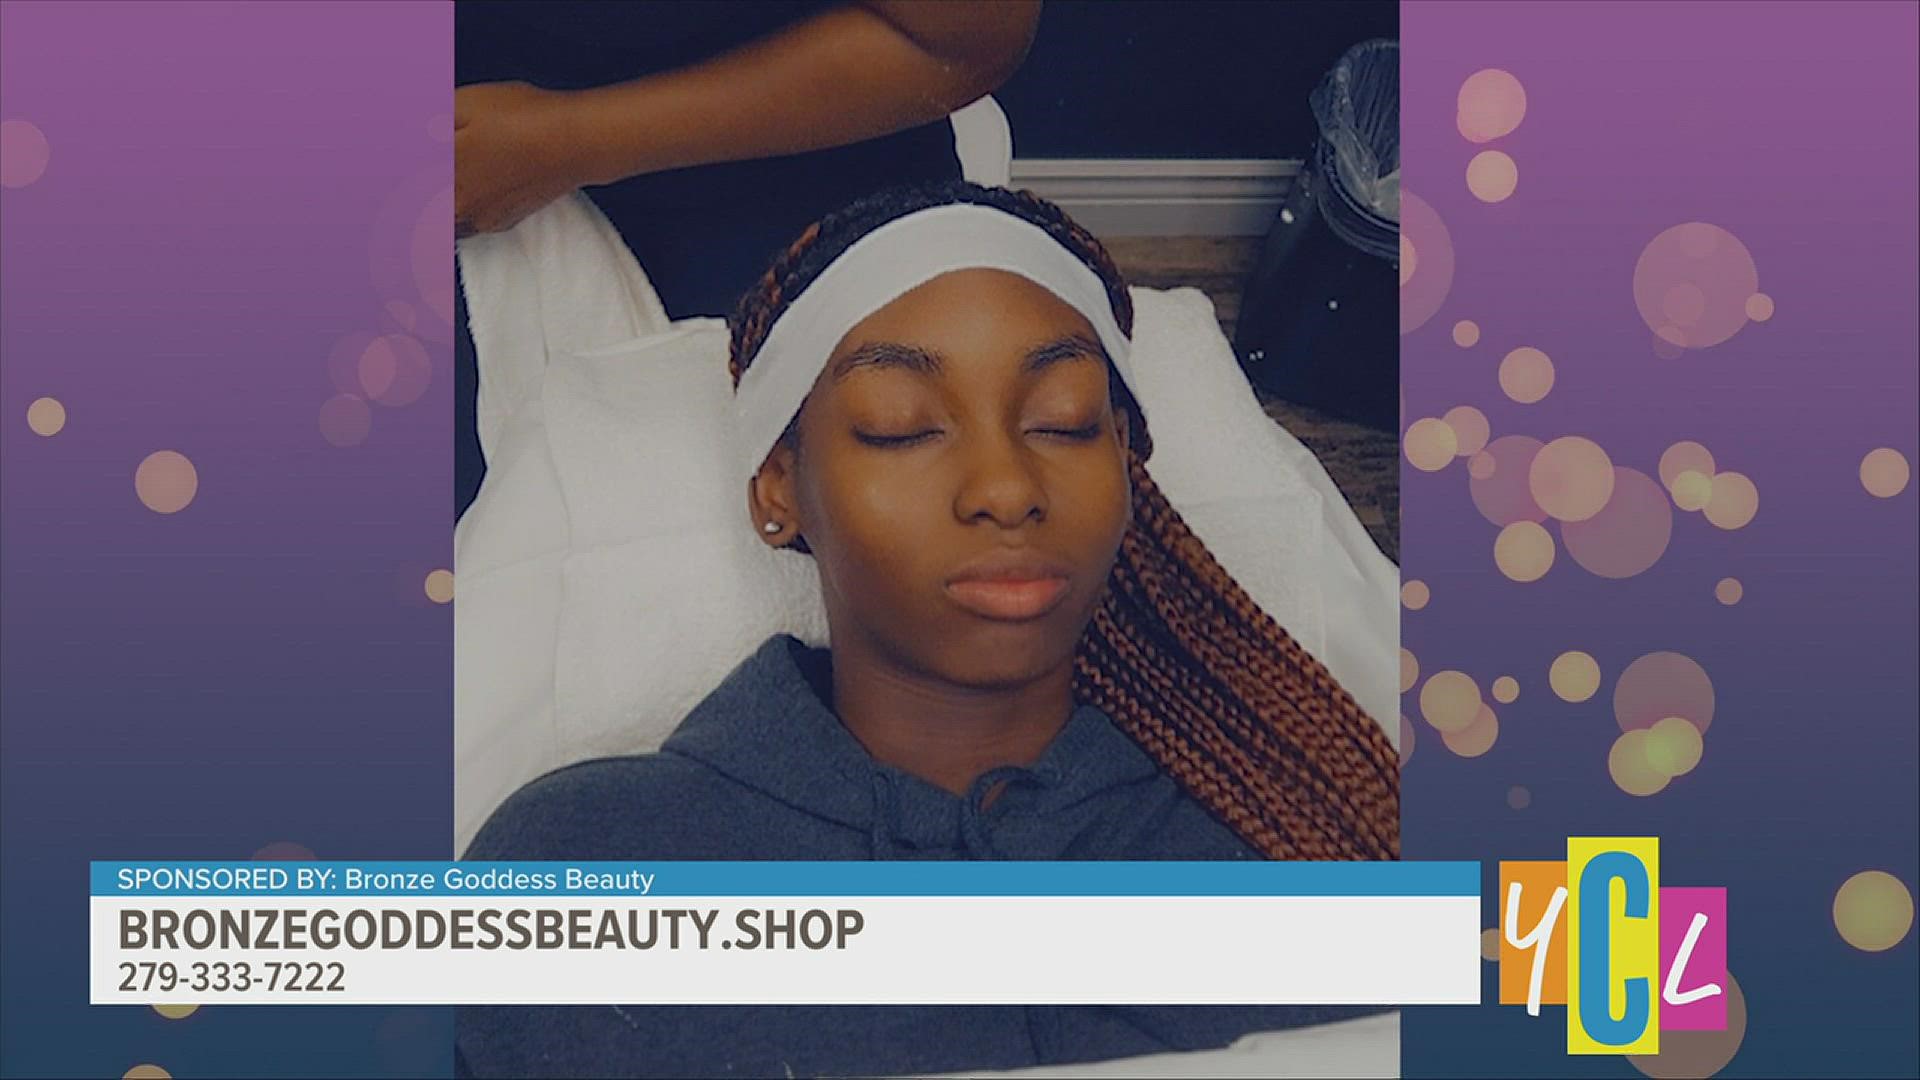 Ensure that your inner light shines & your external body glows through noninvasive treatments for wellness and beauty! This segment is paid by Bronze Goddess Beauty.